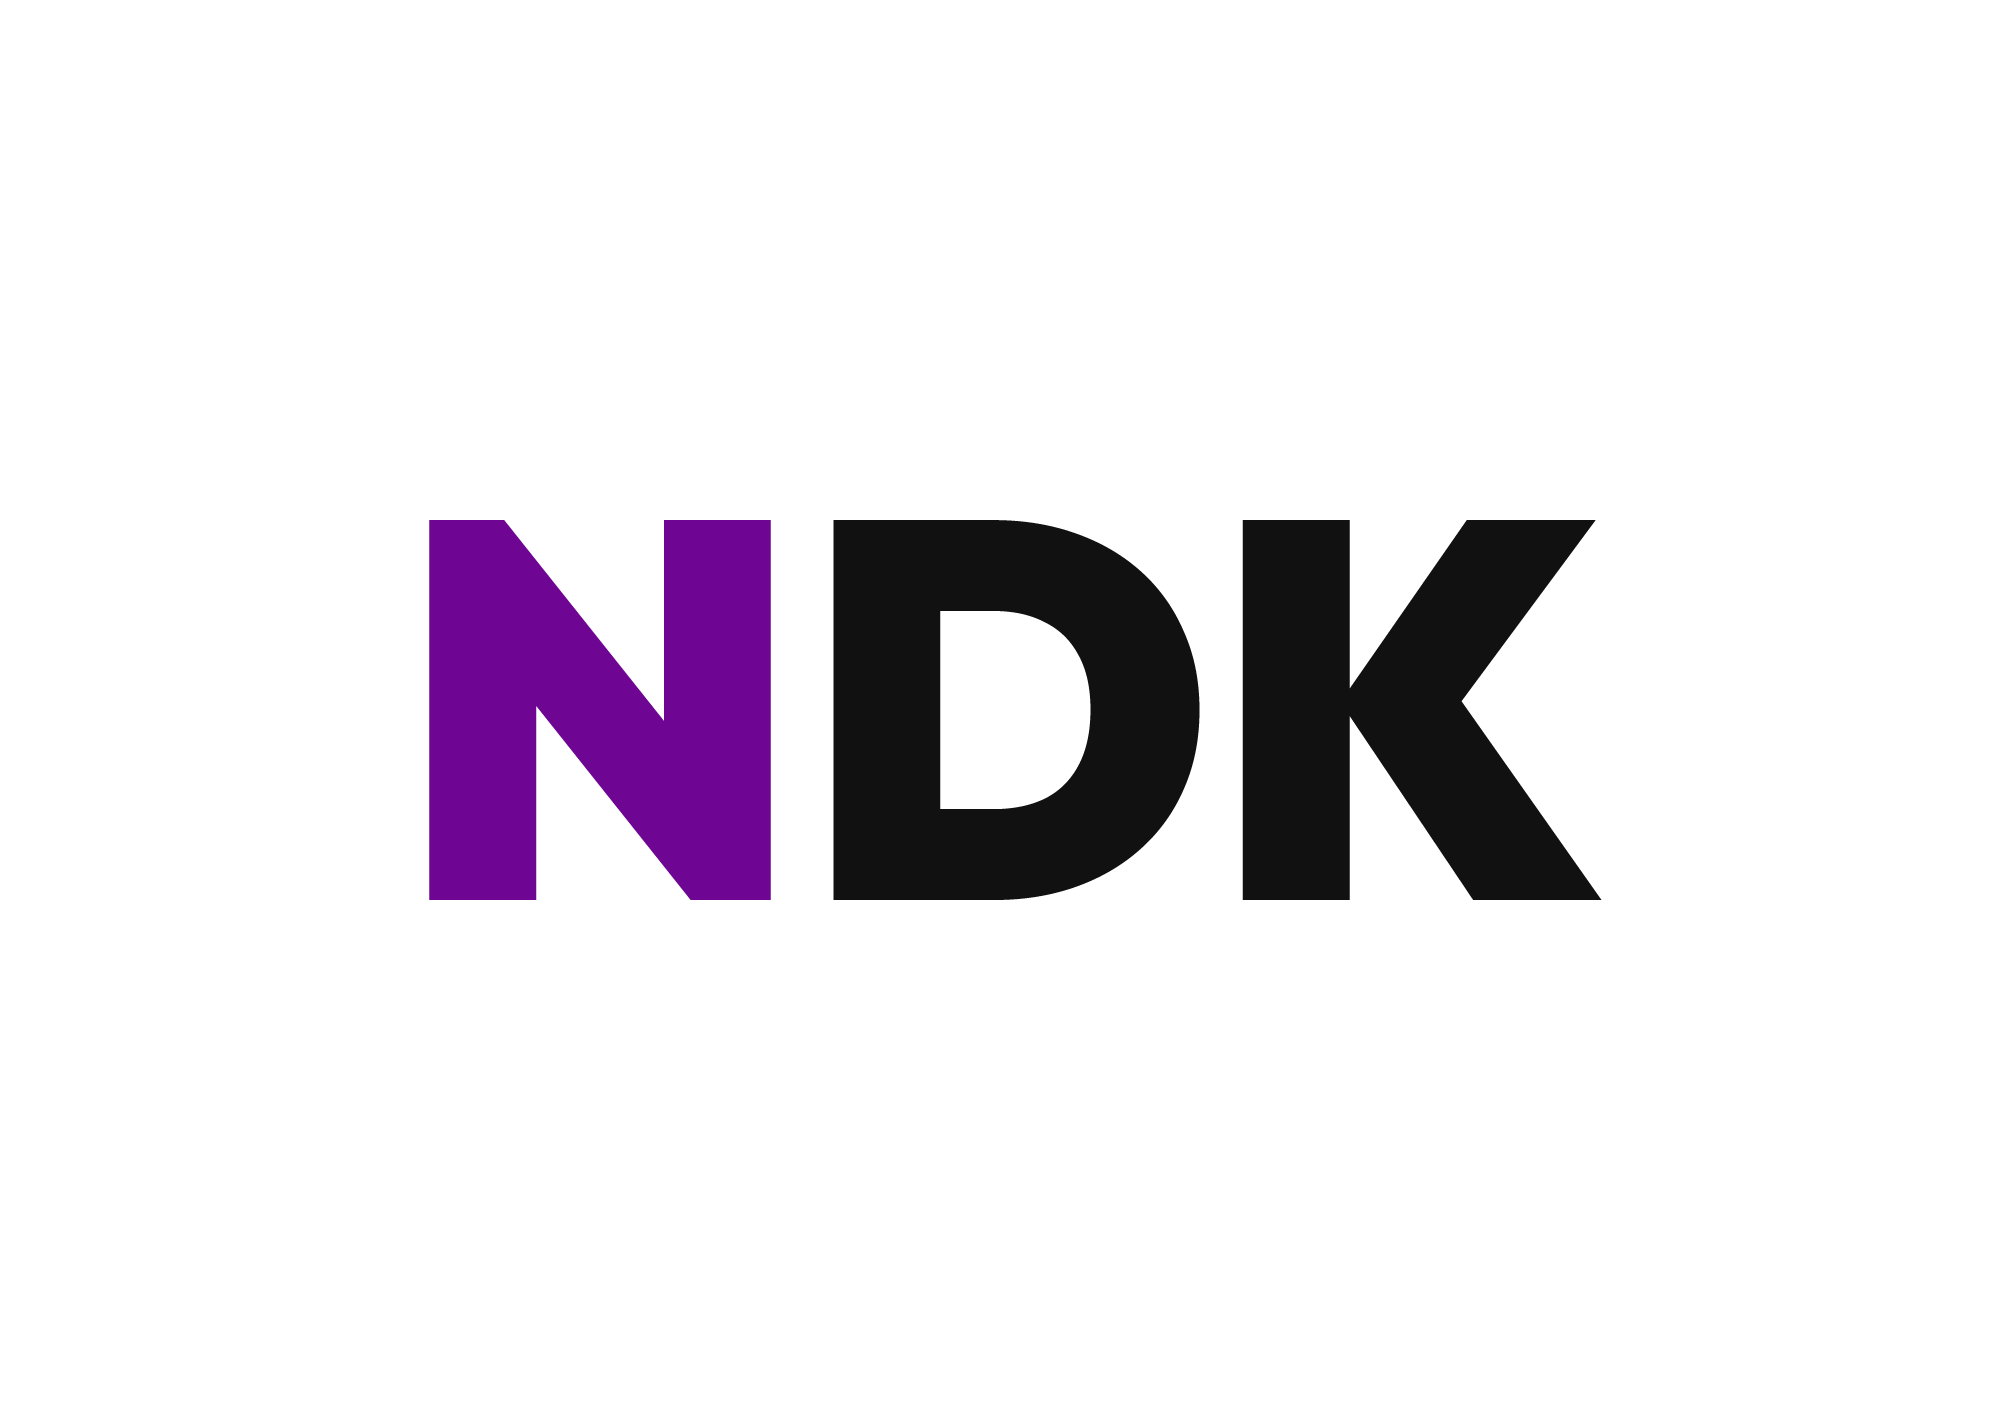 NDK v1.0 Released: OutBox Model